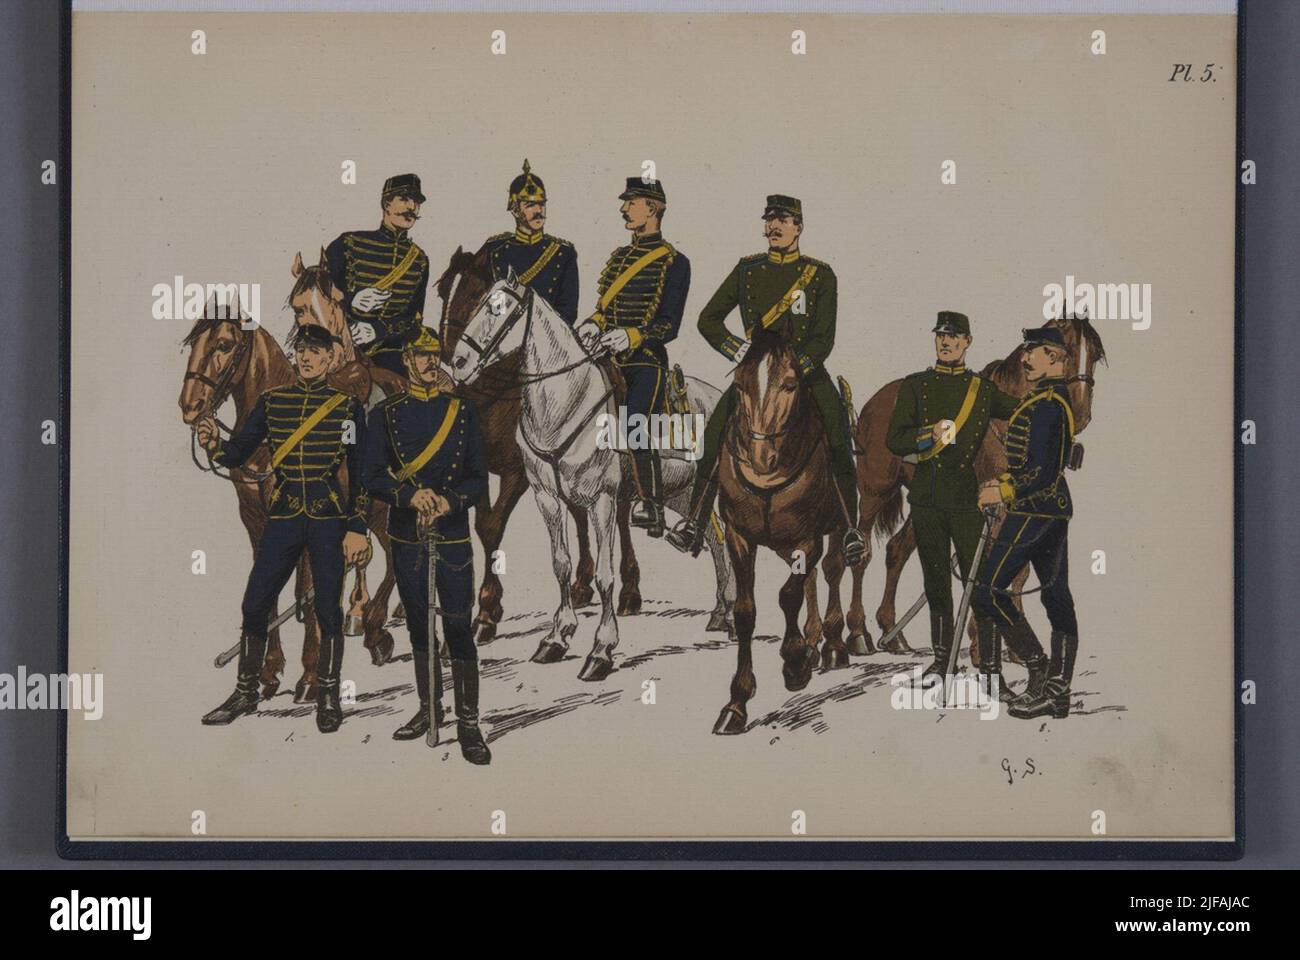 The poster with uniform for the Skånska Husar Regiment, the Skåne Dragon Regiment, the Crown Prince's house regiment and Jämtland's horse hunter corps. Included in the Swedish Army poster collection - 7 posters in color print, published by Otto Holmgren. Belongs to the Army Museum Stock Photo